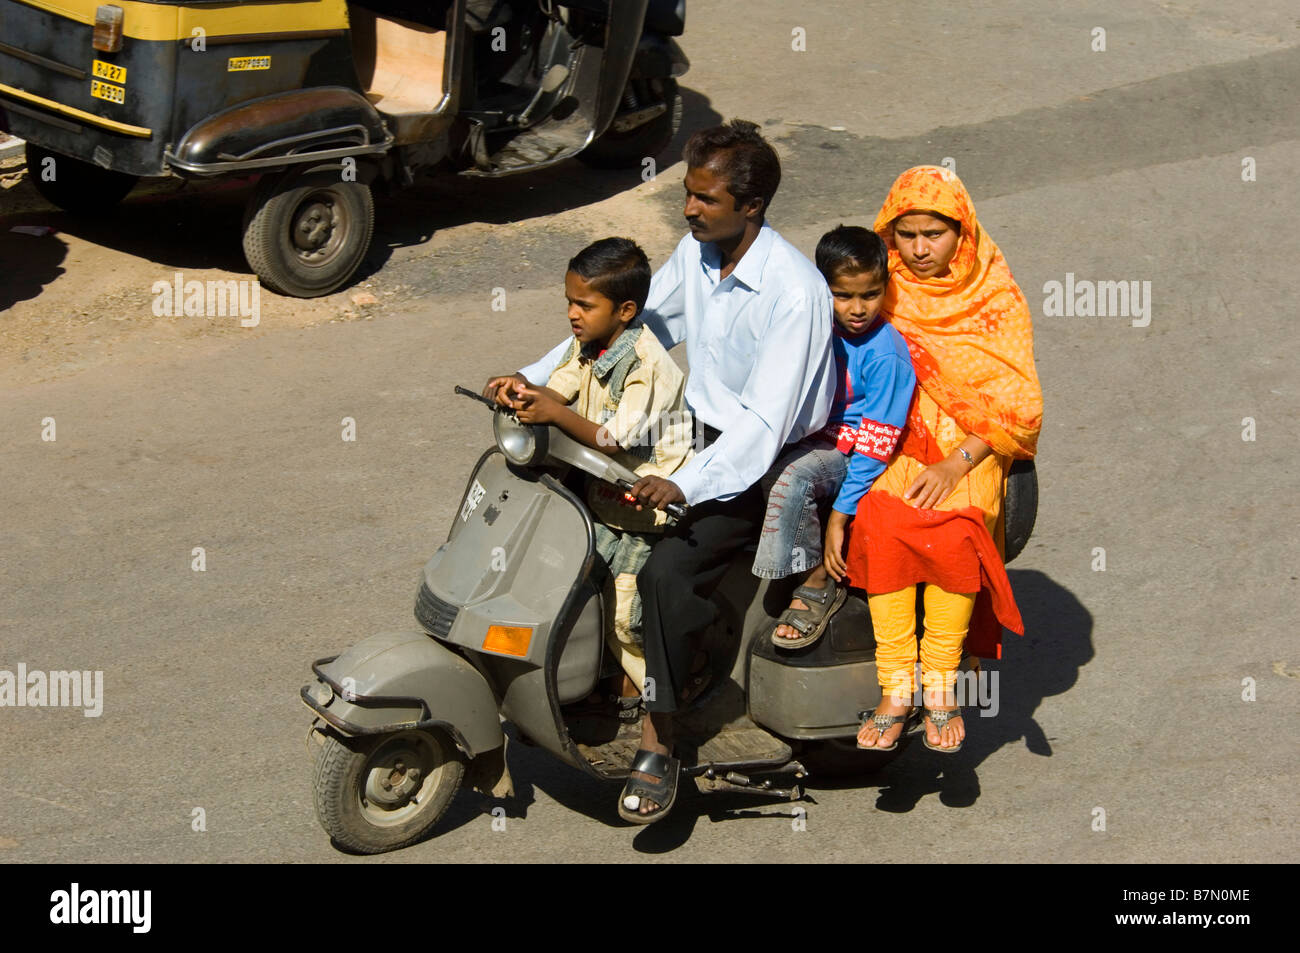 Uplifted flov drivende A Rajasthani family of four squashed together on a motor scooter with no  crash helmets - a common sight in India Stock Photo - Alamy